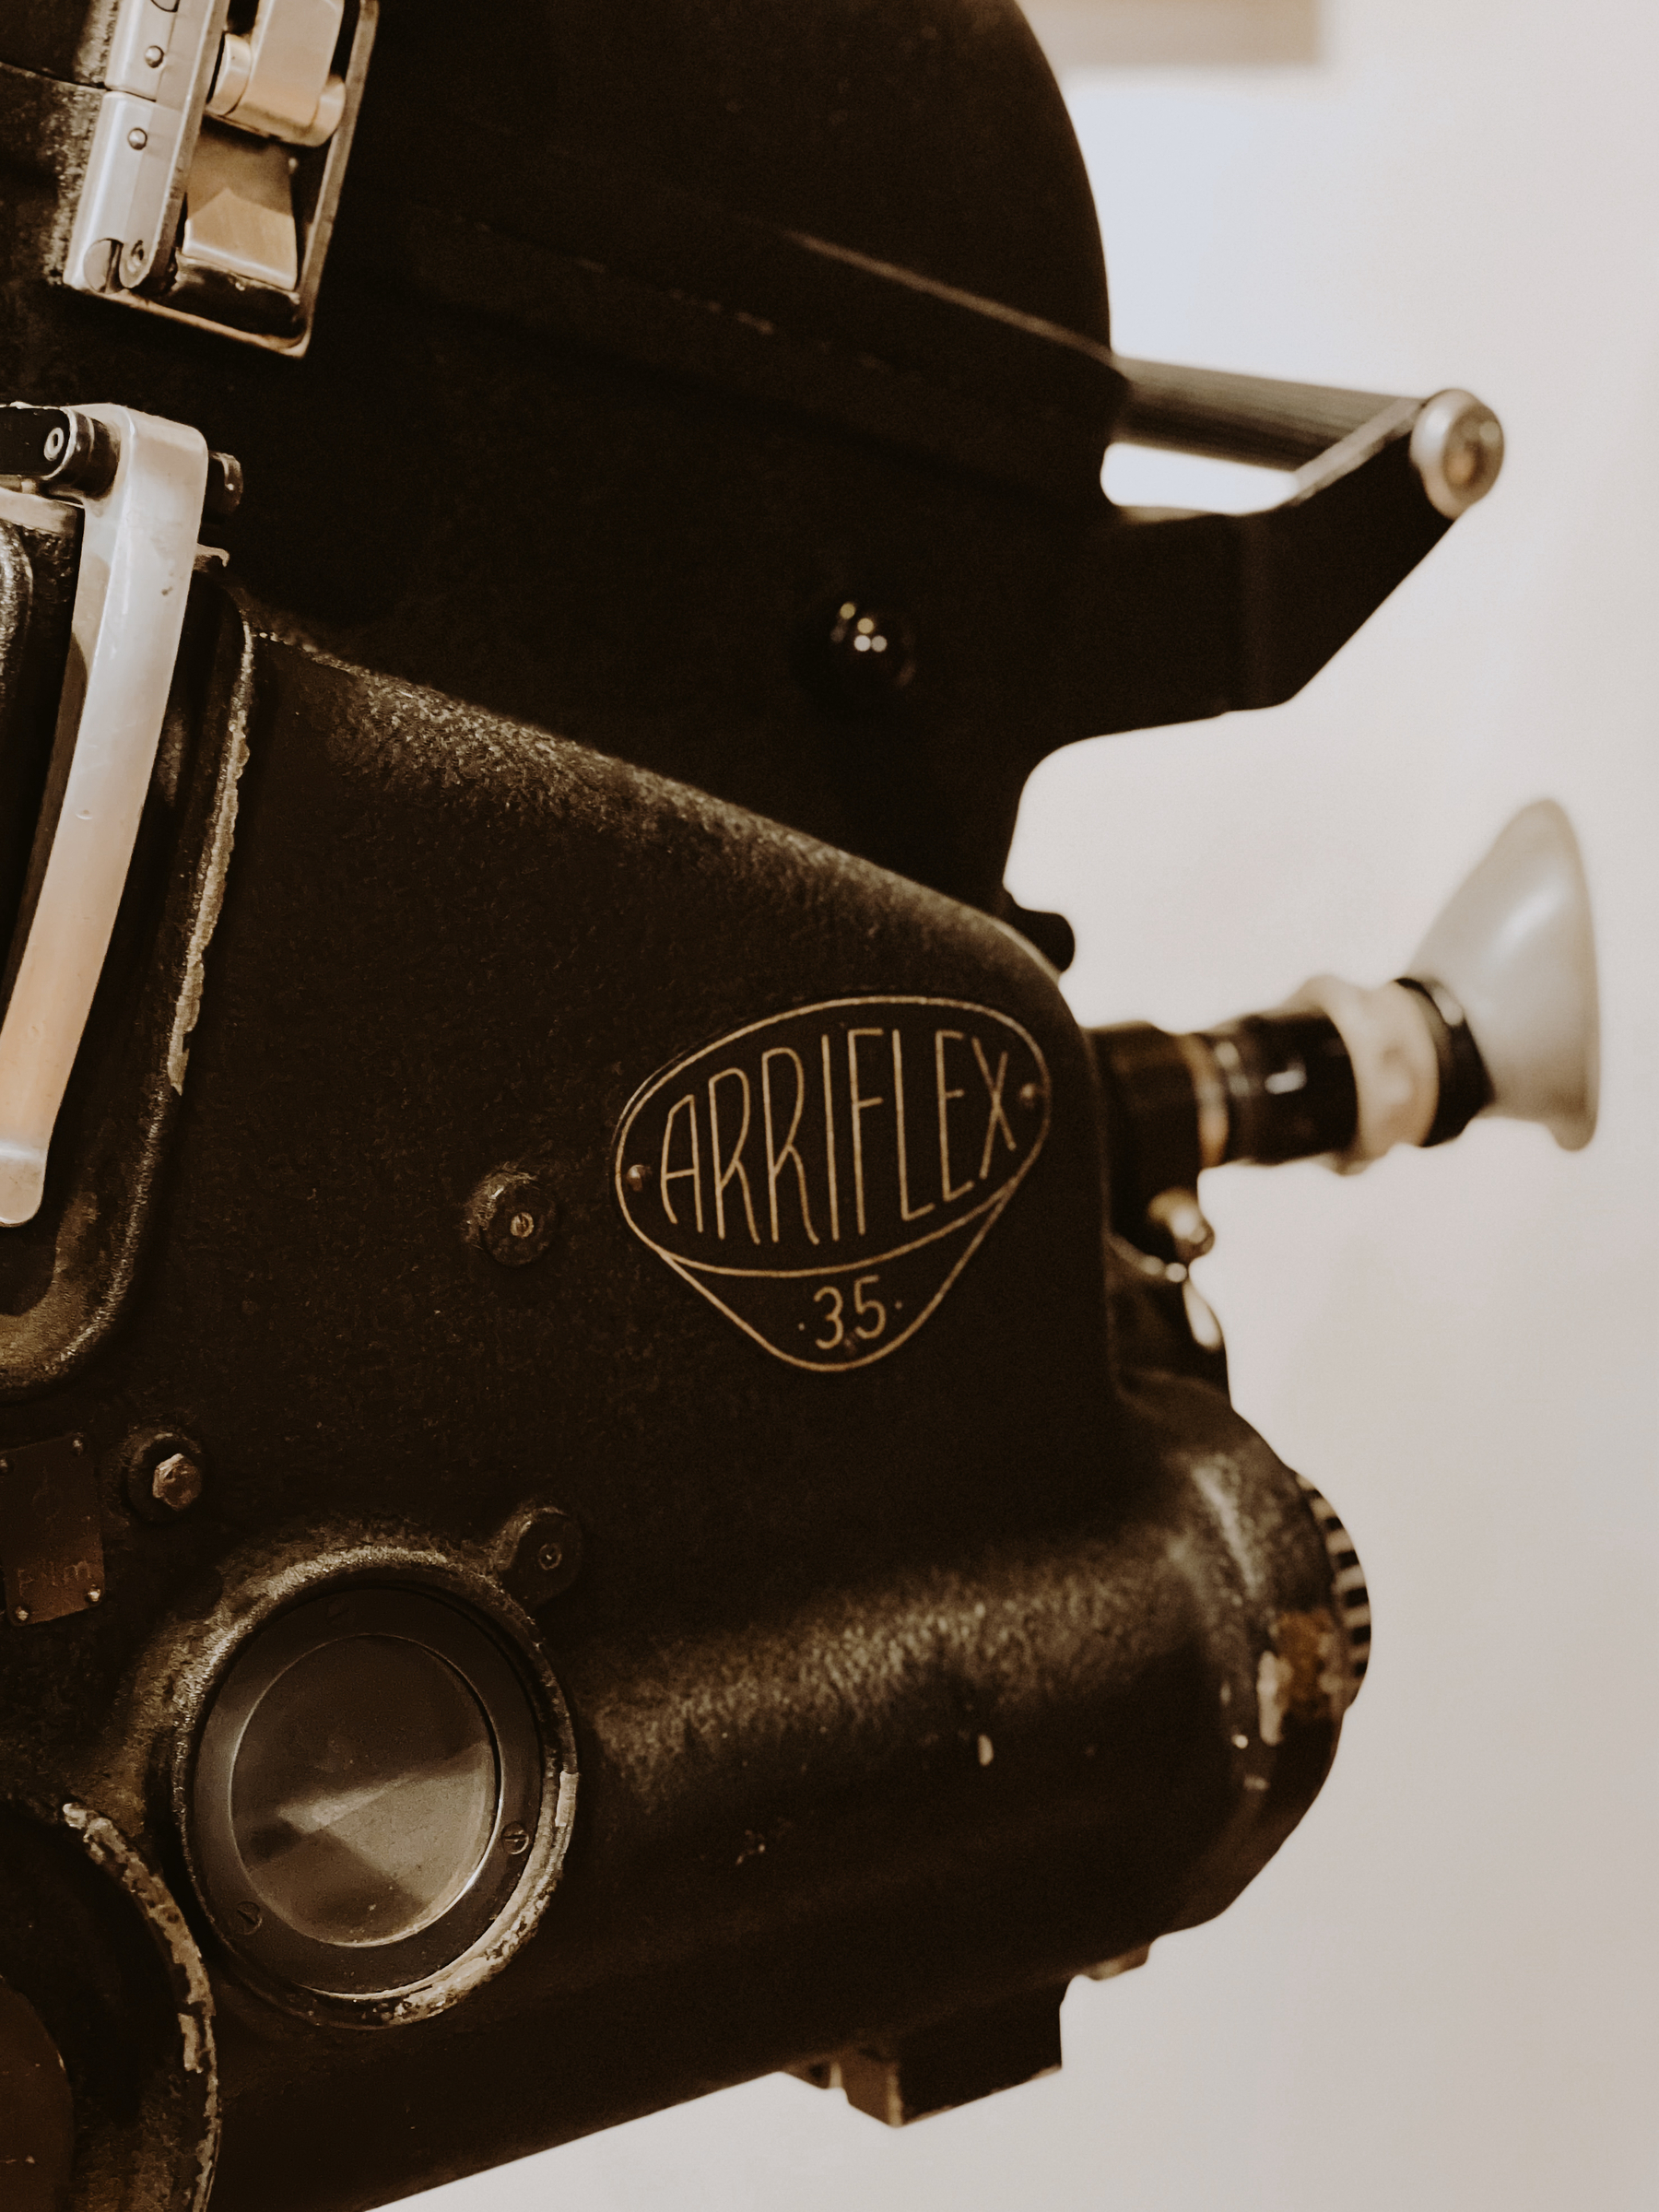 Vintage Arriflex 35mm film camera with visible branding on a neutral background.